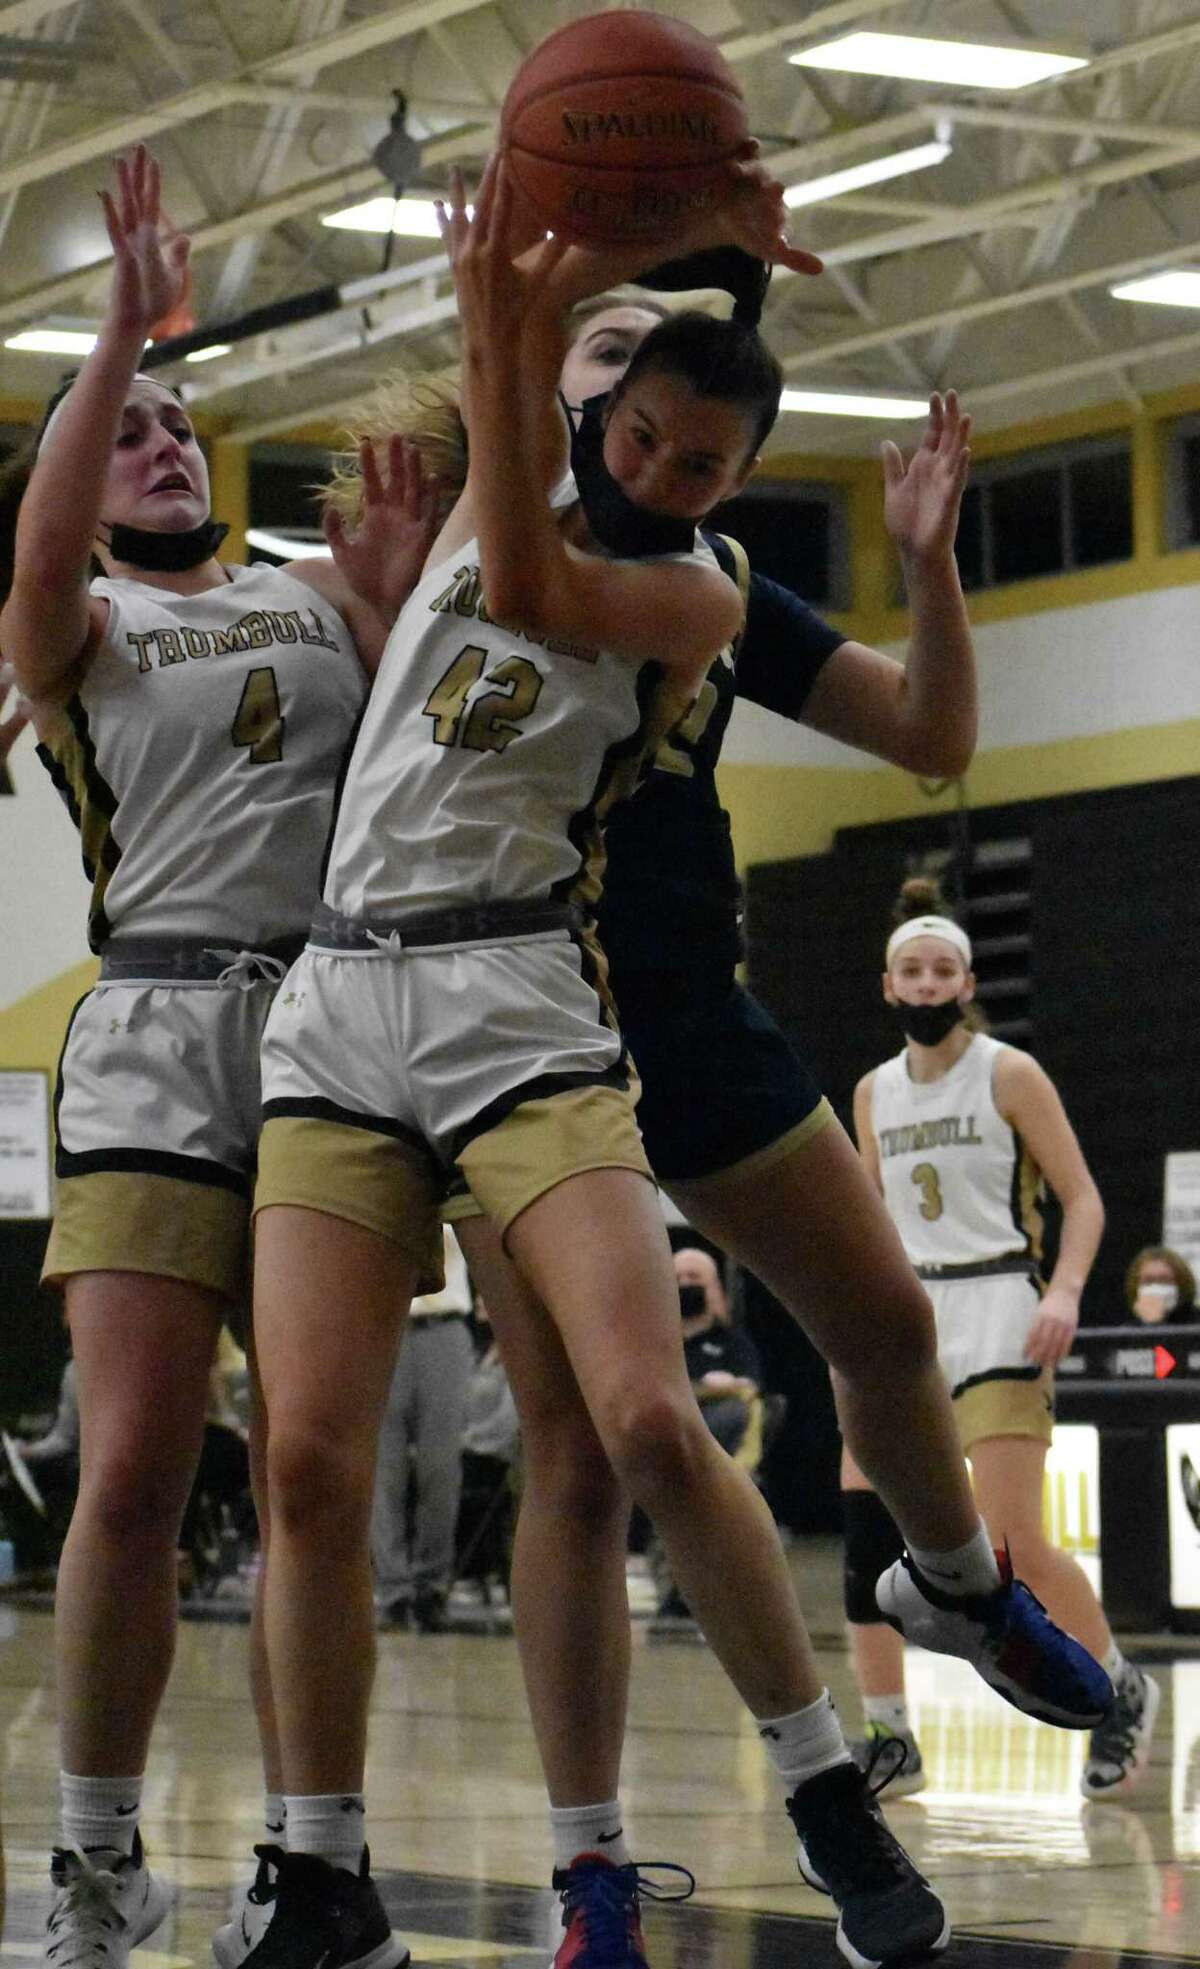 Trumbull's Mary Lynch grabs a rebound during a girls basketball game between Trumbull and Newington at Trumbull High, Trumbull on Saturday, Jan. 8, 2022.